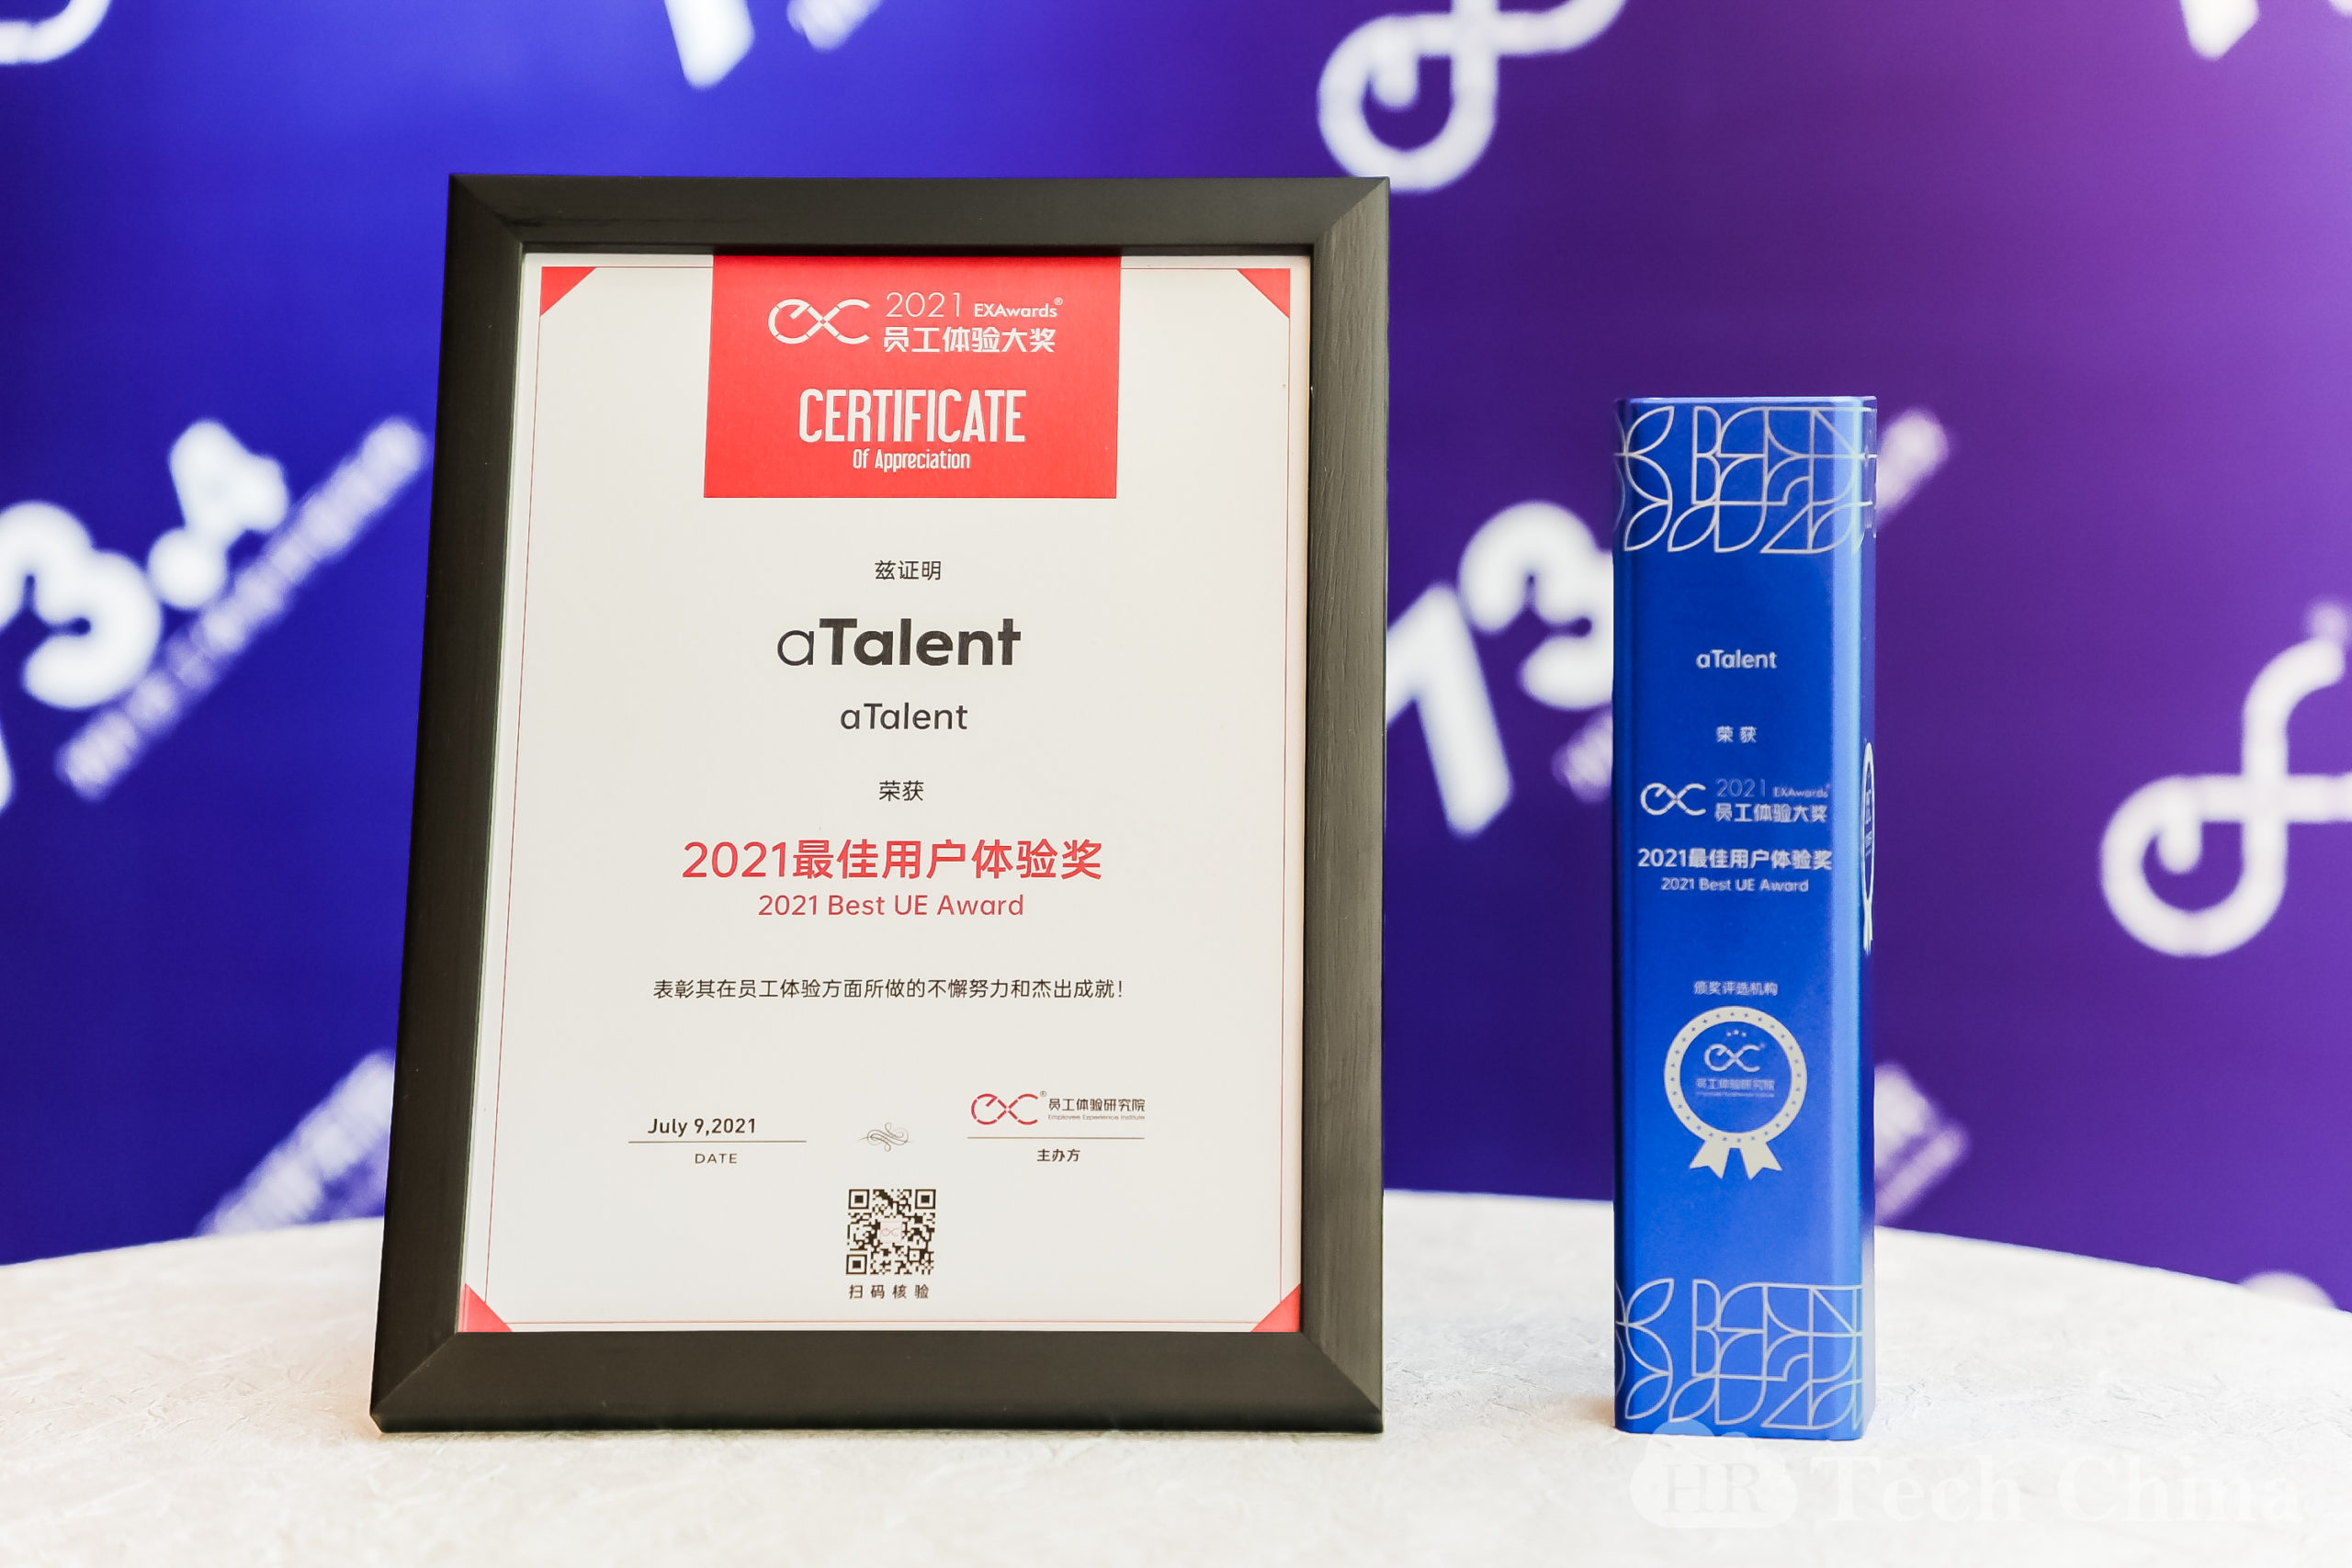 aTalent wins Best EX Award: Strategic focus on improving employee experience to drive business performance growth插图